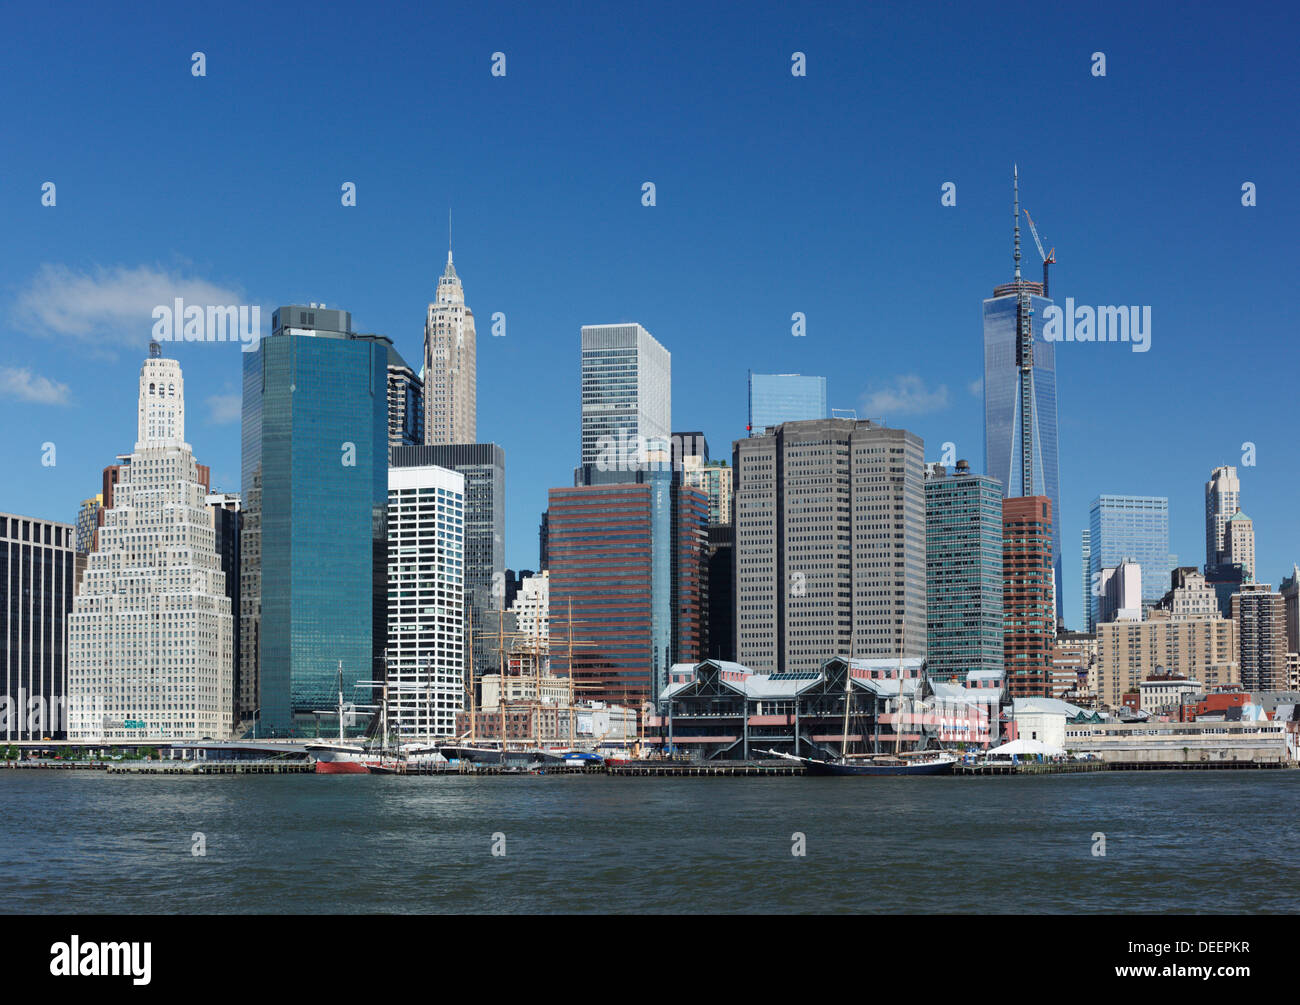 Freedom Tower rises above the Lower Manhattan skyline in New York city, USA. Stock Photo